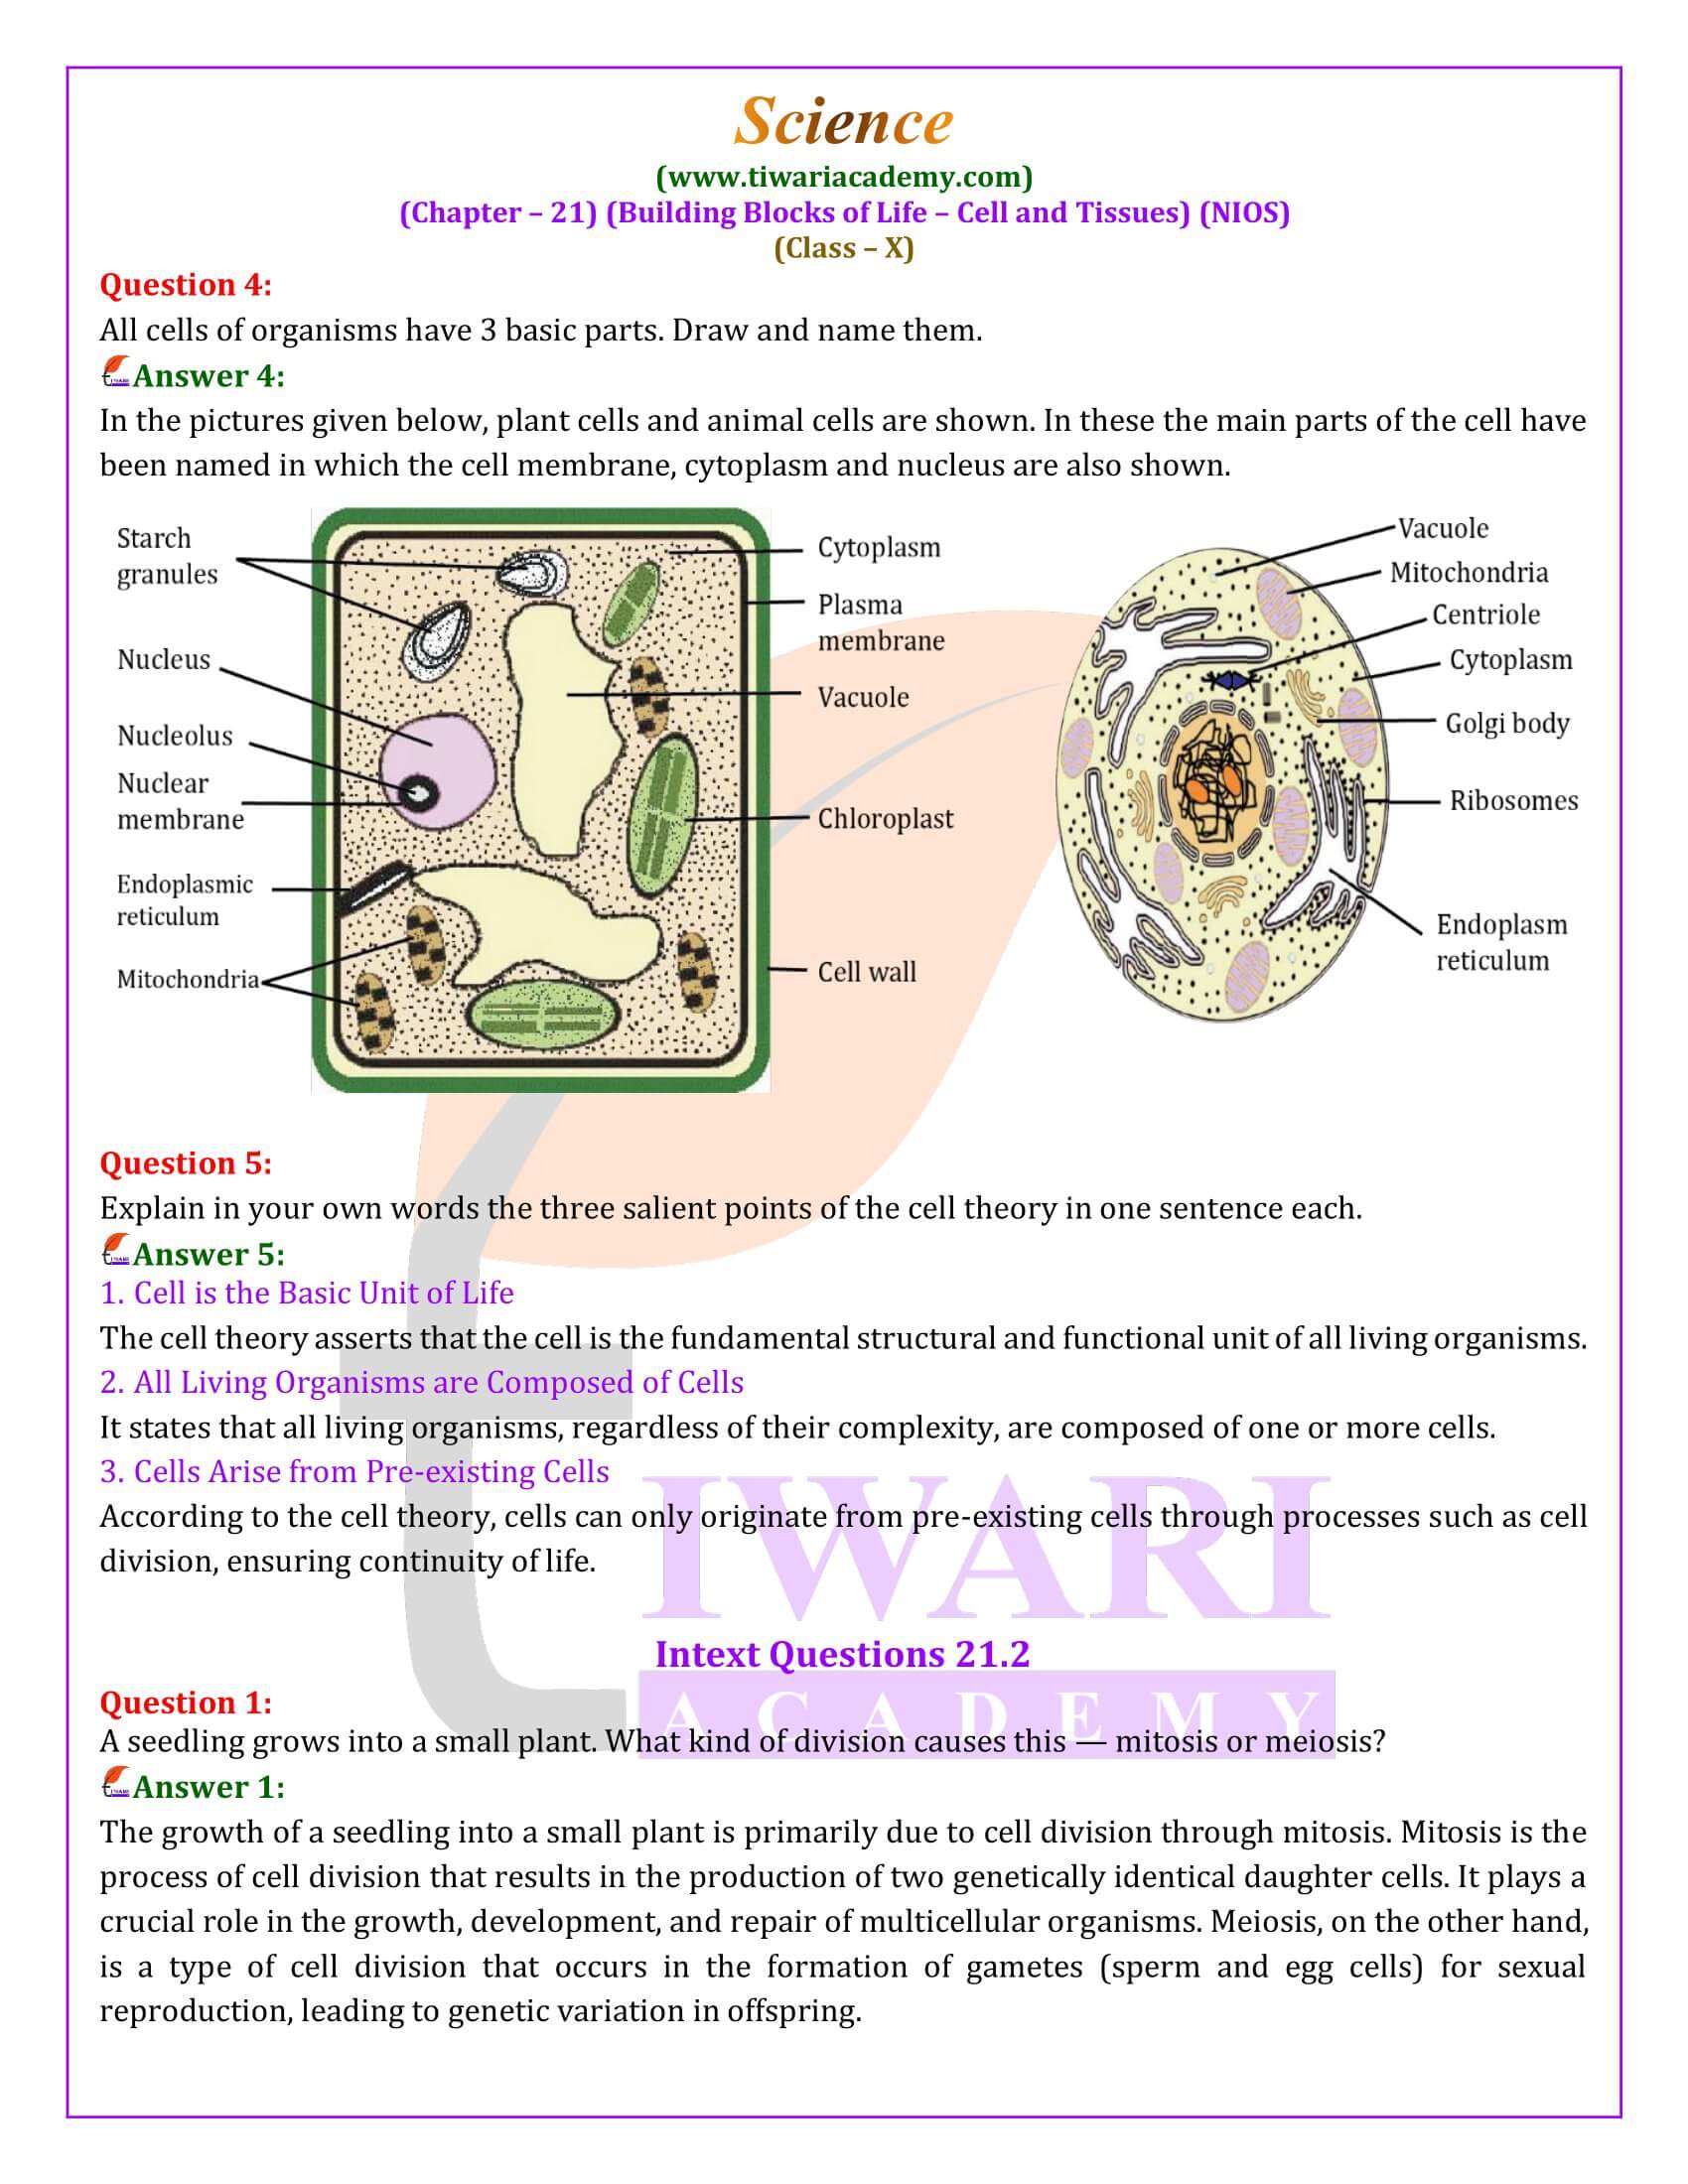 NIOS Class 10 Science Chapter 21 Cell and Tissue